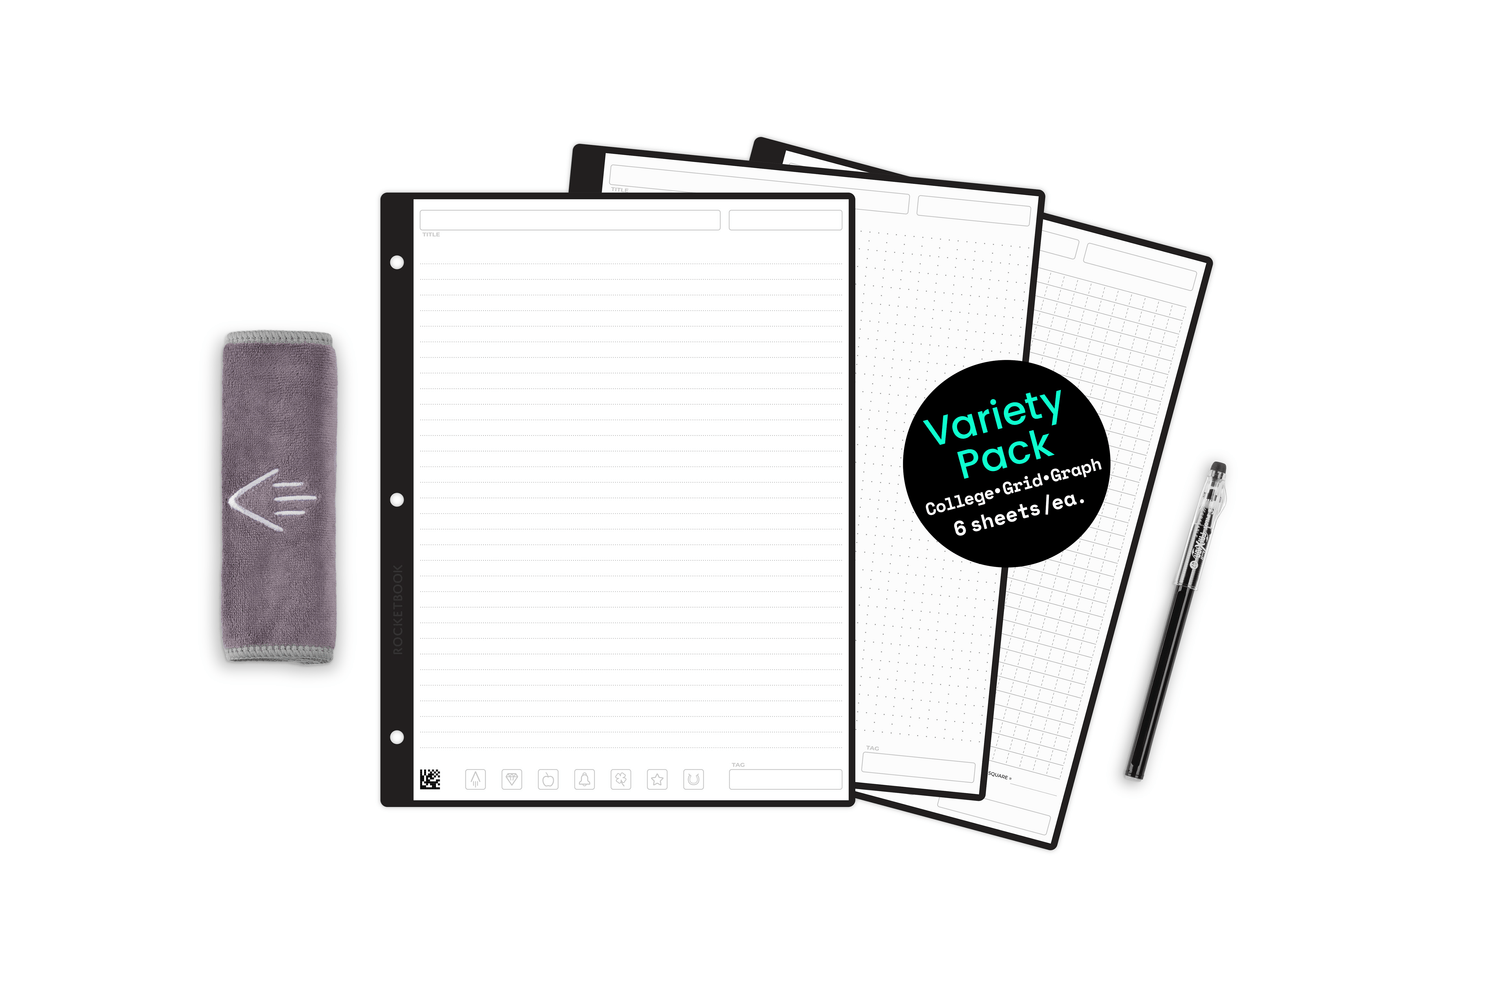  Rocketbook Smart Reusable Lined Eco-Friendly Notebook with 4  colored Pilot Frixion Pens, 1 Microfiber Cloth, & 1 Spay Bottle - Infinity  Black Cover, Letter Size (8.5in x 11in) : Office Products